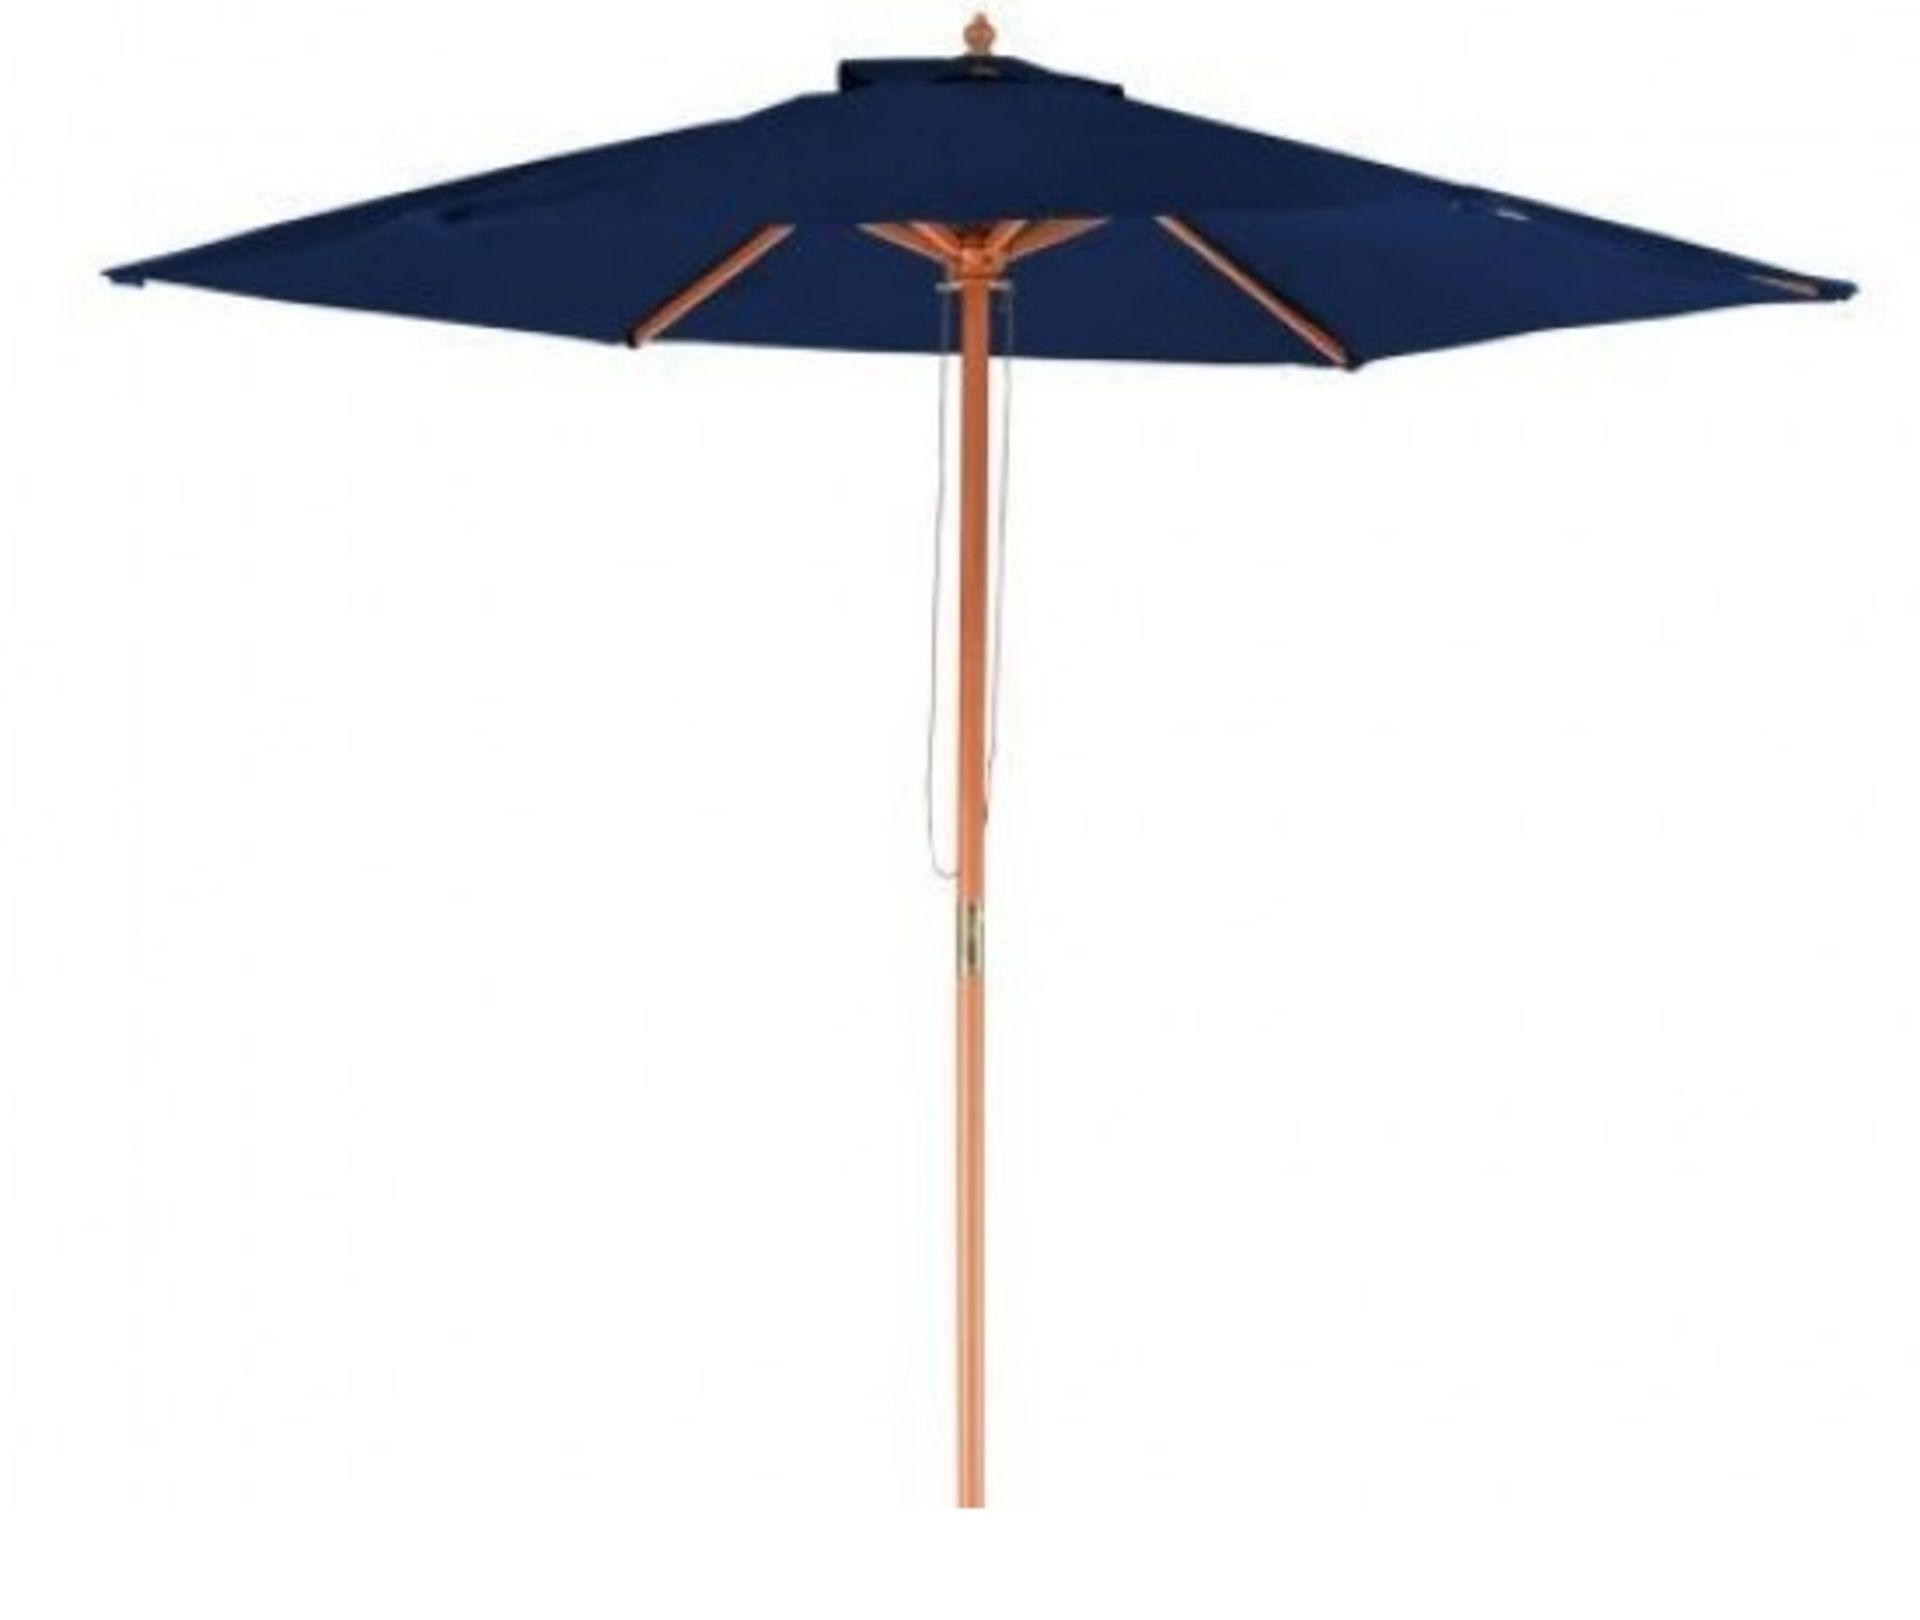 V *TRADE QTY* Brand New 2.5m Blue Pulley Parasol X 40 YOUR BID PRICE TO BE MULTIPLIED BY FORTY